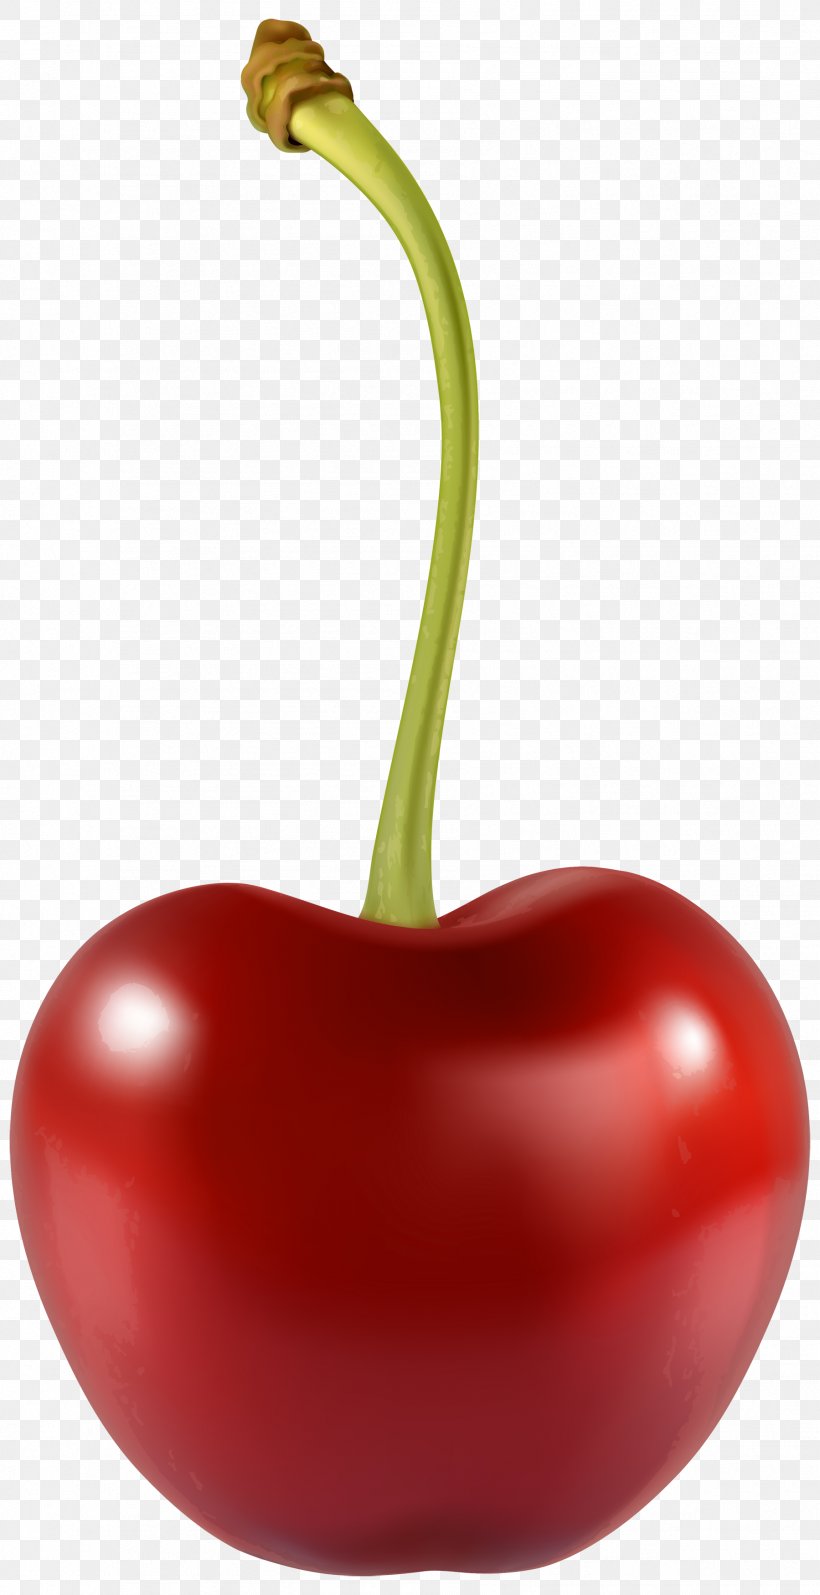 Cherry Berry Fruit Clip Art, PNG, 1799x3500px, Cherry, Bell Pepper, Bell Peppers And Chili Peppers, Berry, Black Cherry Download Free